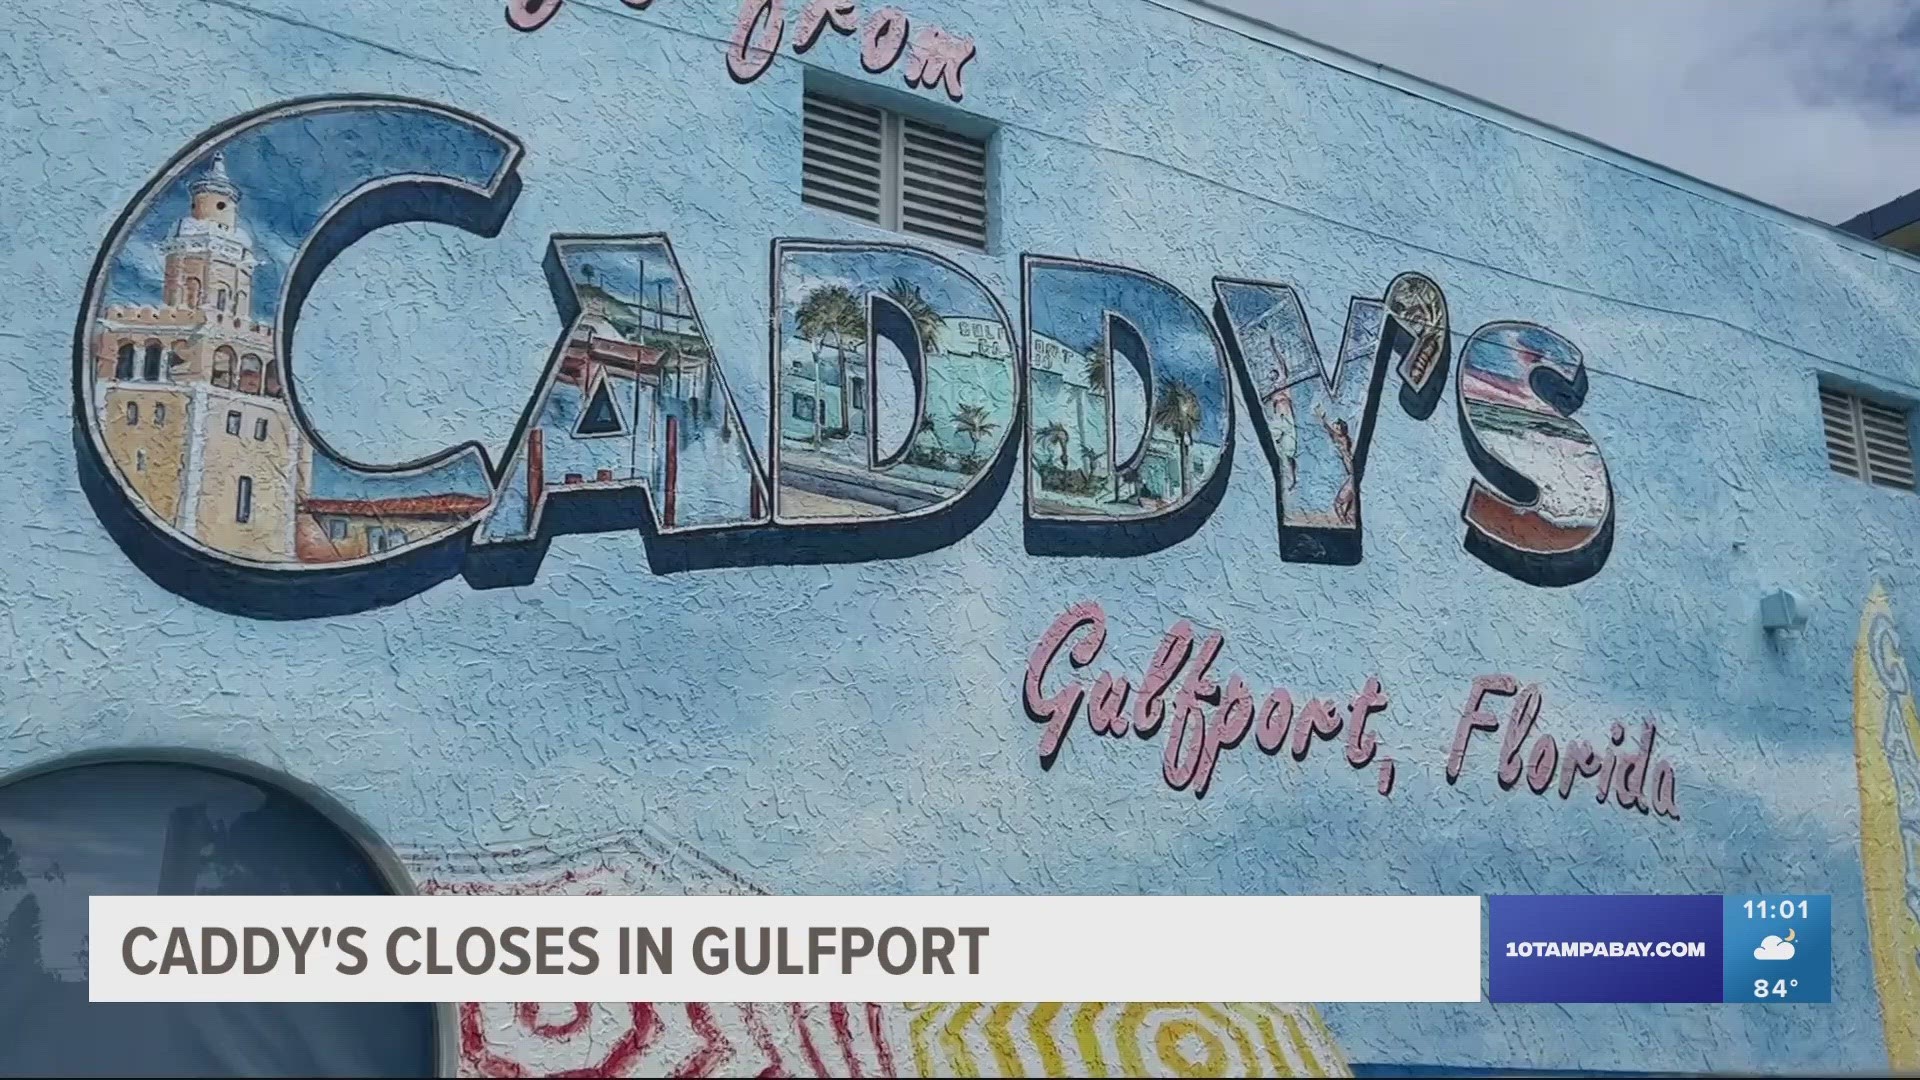 Caddy's in Gulfport posted on their windows and doors they are closed and people can visit them at their other locations with no explanation as to why.